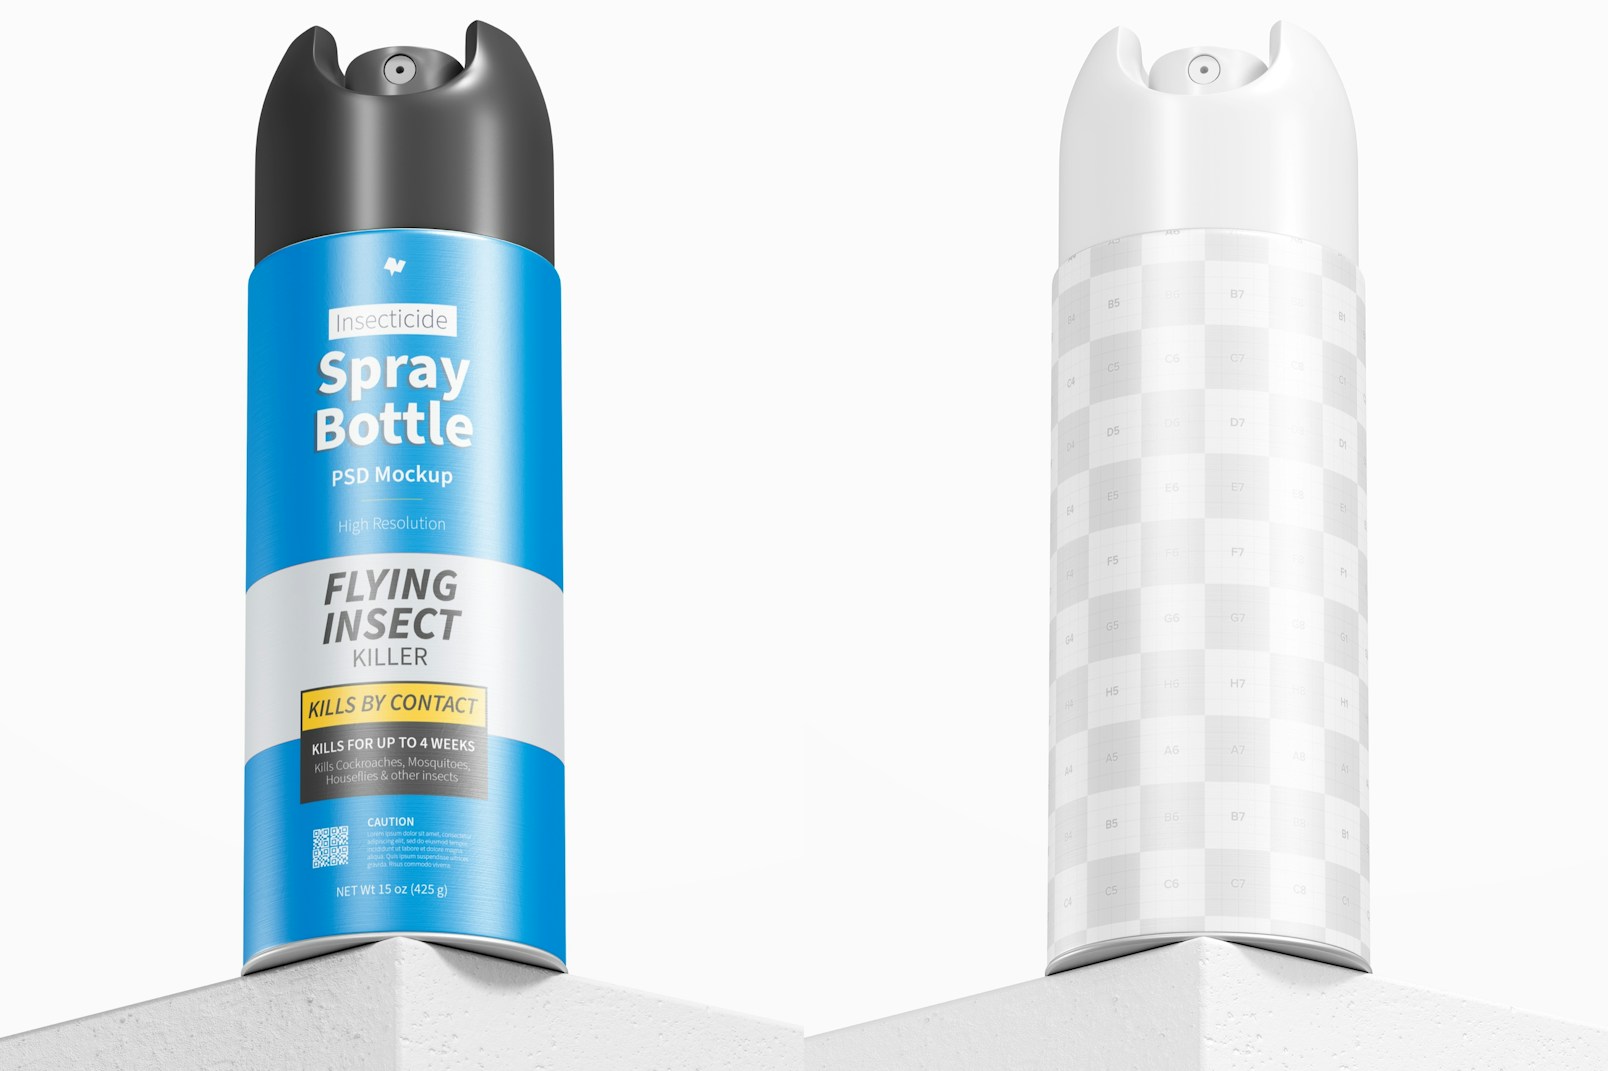 Insecticide Spray Bottle Mockup, Low Angle View